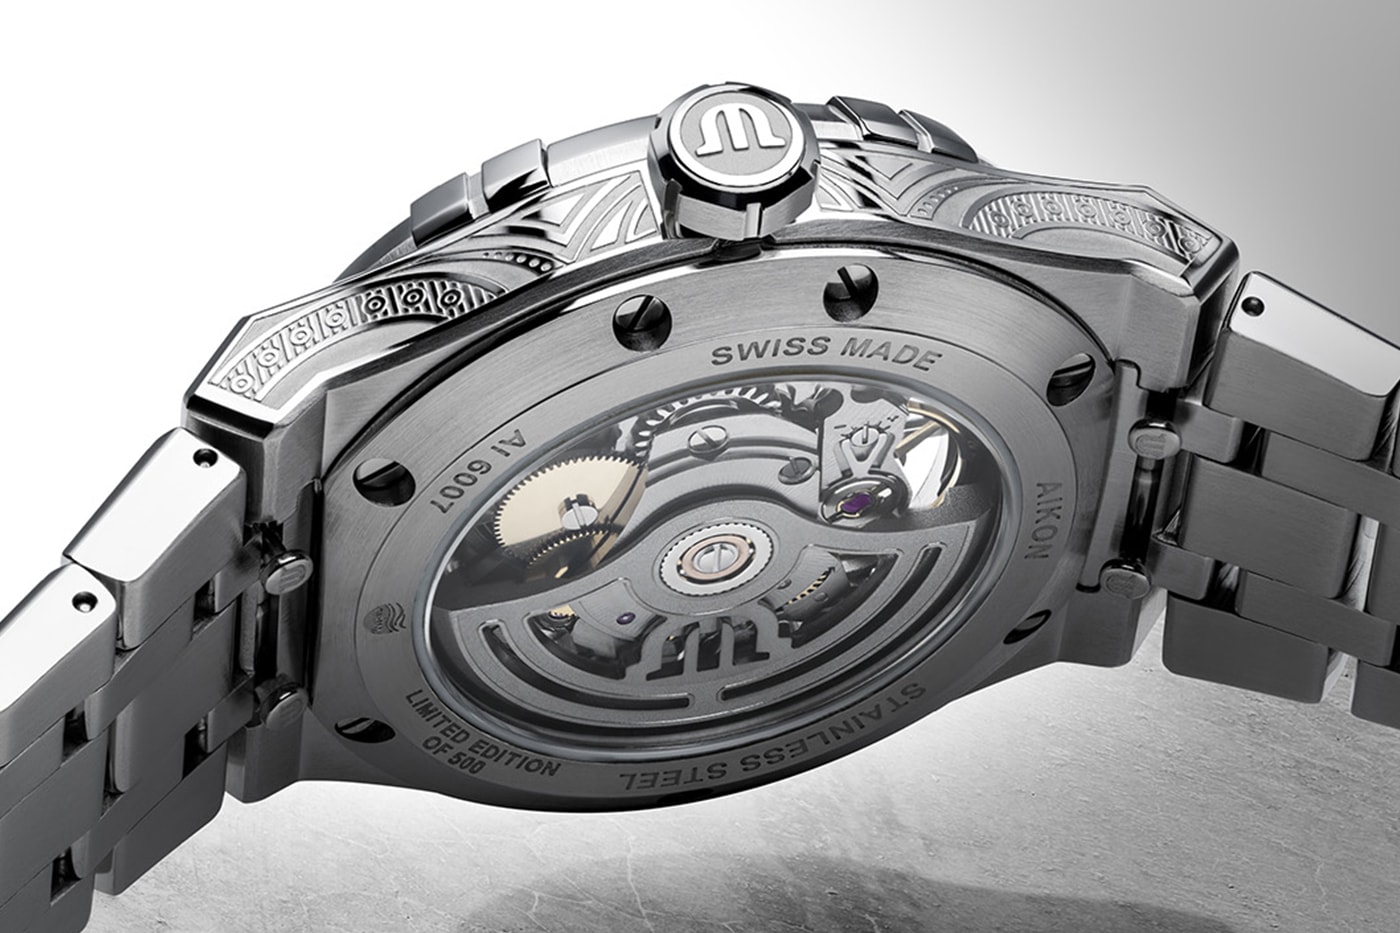 Maurice Lacroix AIKON Skeleton Urban Tribe Limited-Edition Release Info